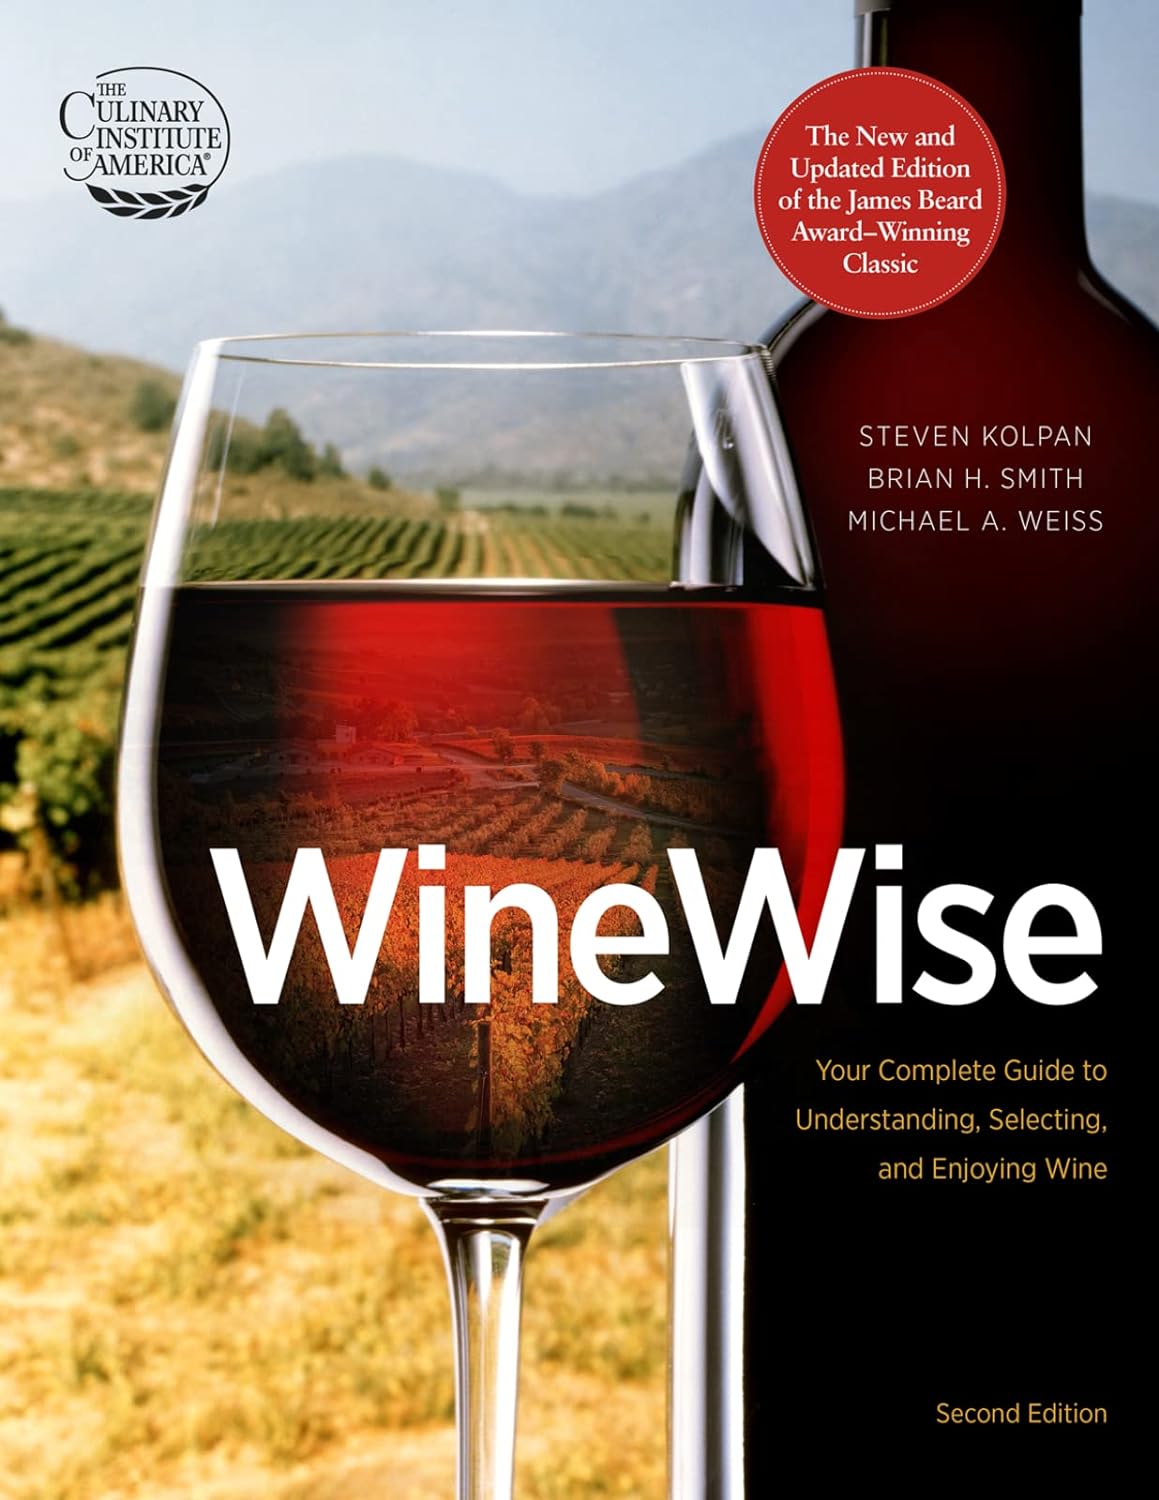 Winewise, Second Edition (Steven Kolpan, Michael A Weiss, Brian H Smith, Culinary Institute of America)